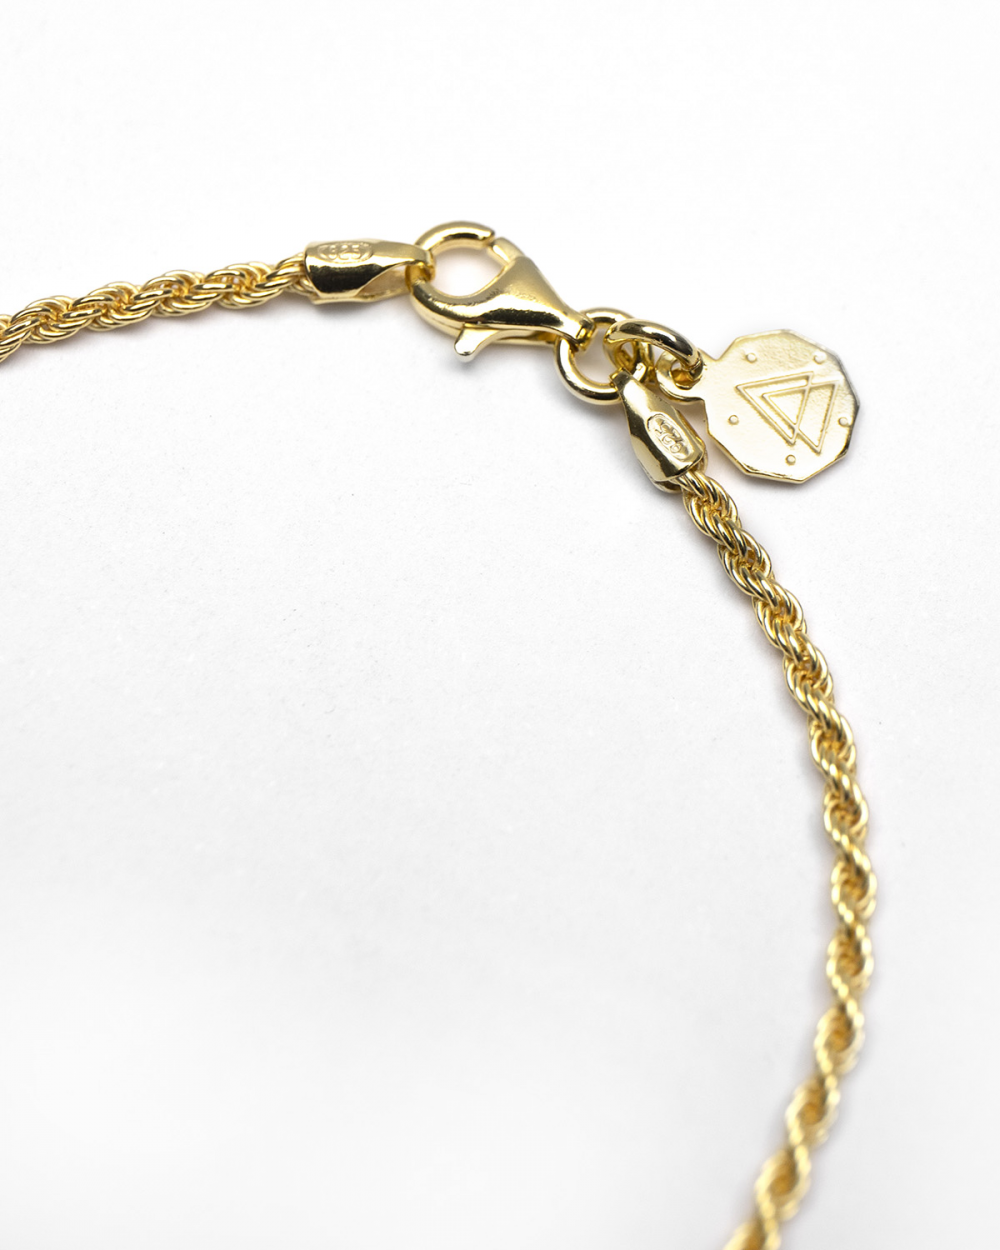 TORCHON CHAIN 040 / POLISHED YELLOW GOLD